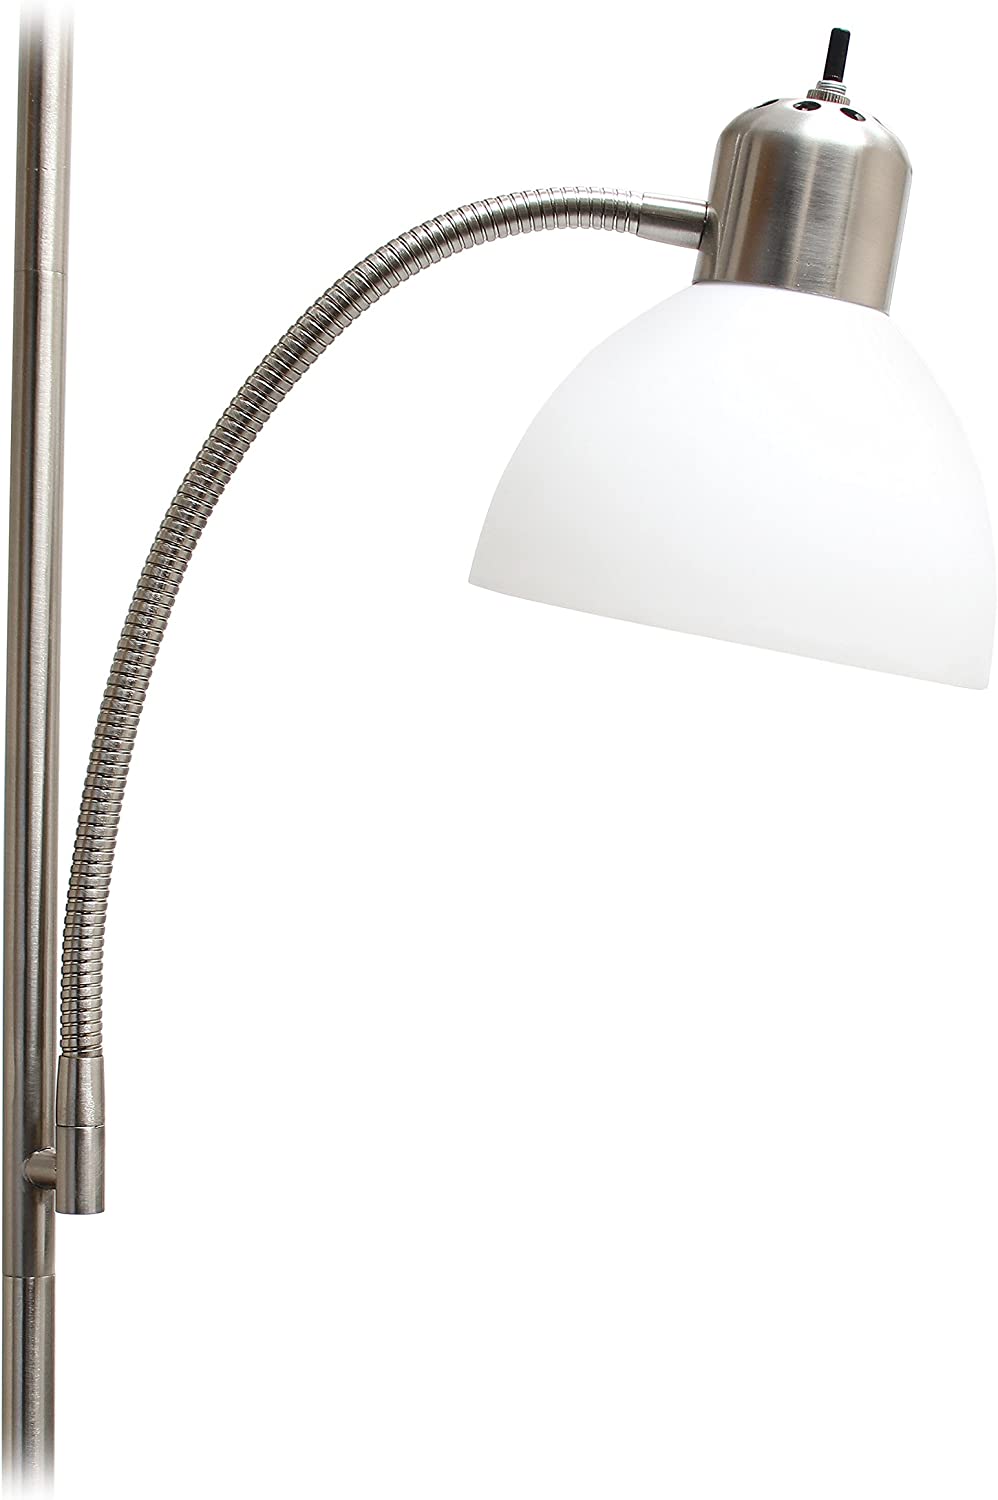 Simple Designs LF2000-BSN Mother-Daughter Floor Lamp with Reading Light, Brushed Nickel